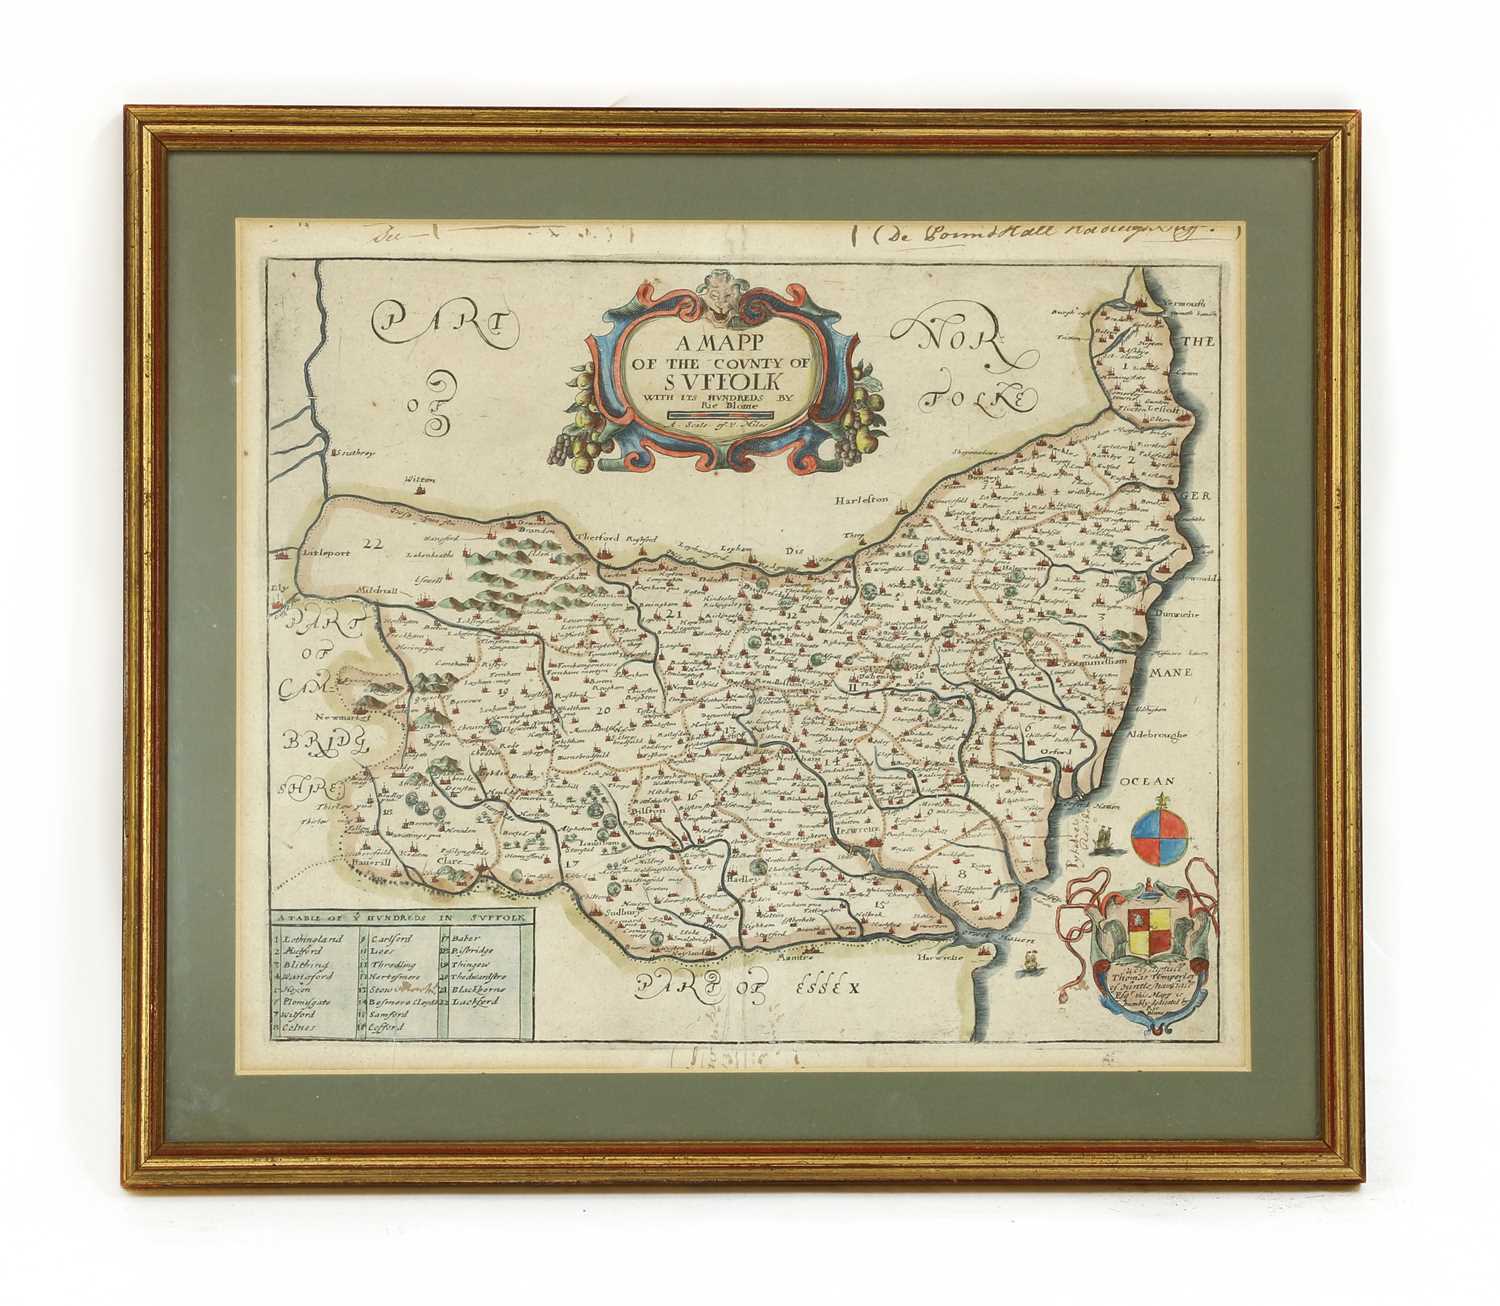 Lot 47 - MAP OF SUFFOLK by Richard Blome